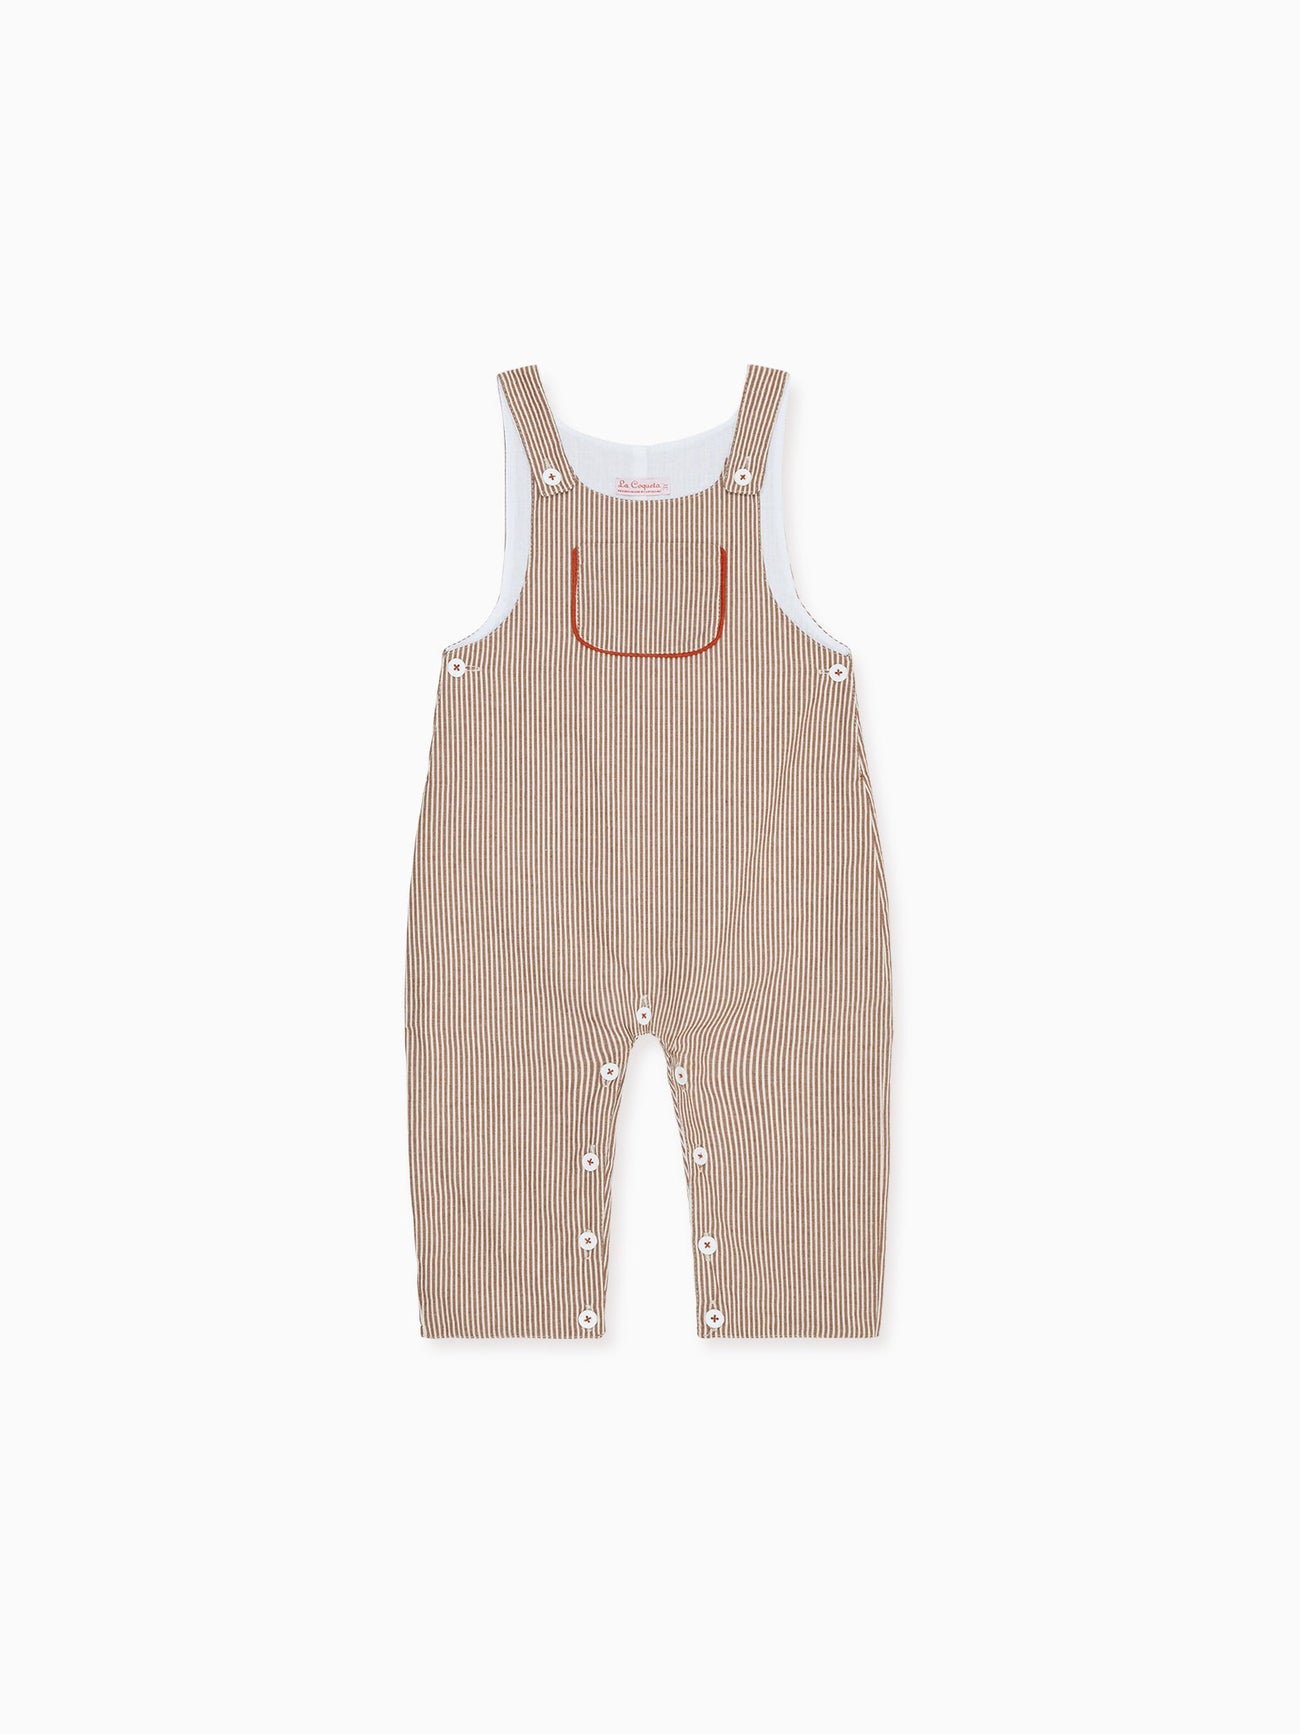 Seesaw Childrens Clothes - Reversible dungarees with needlecord on